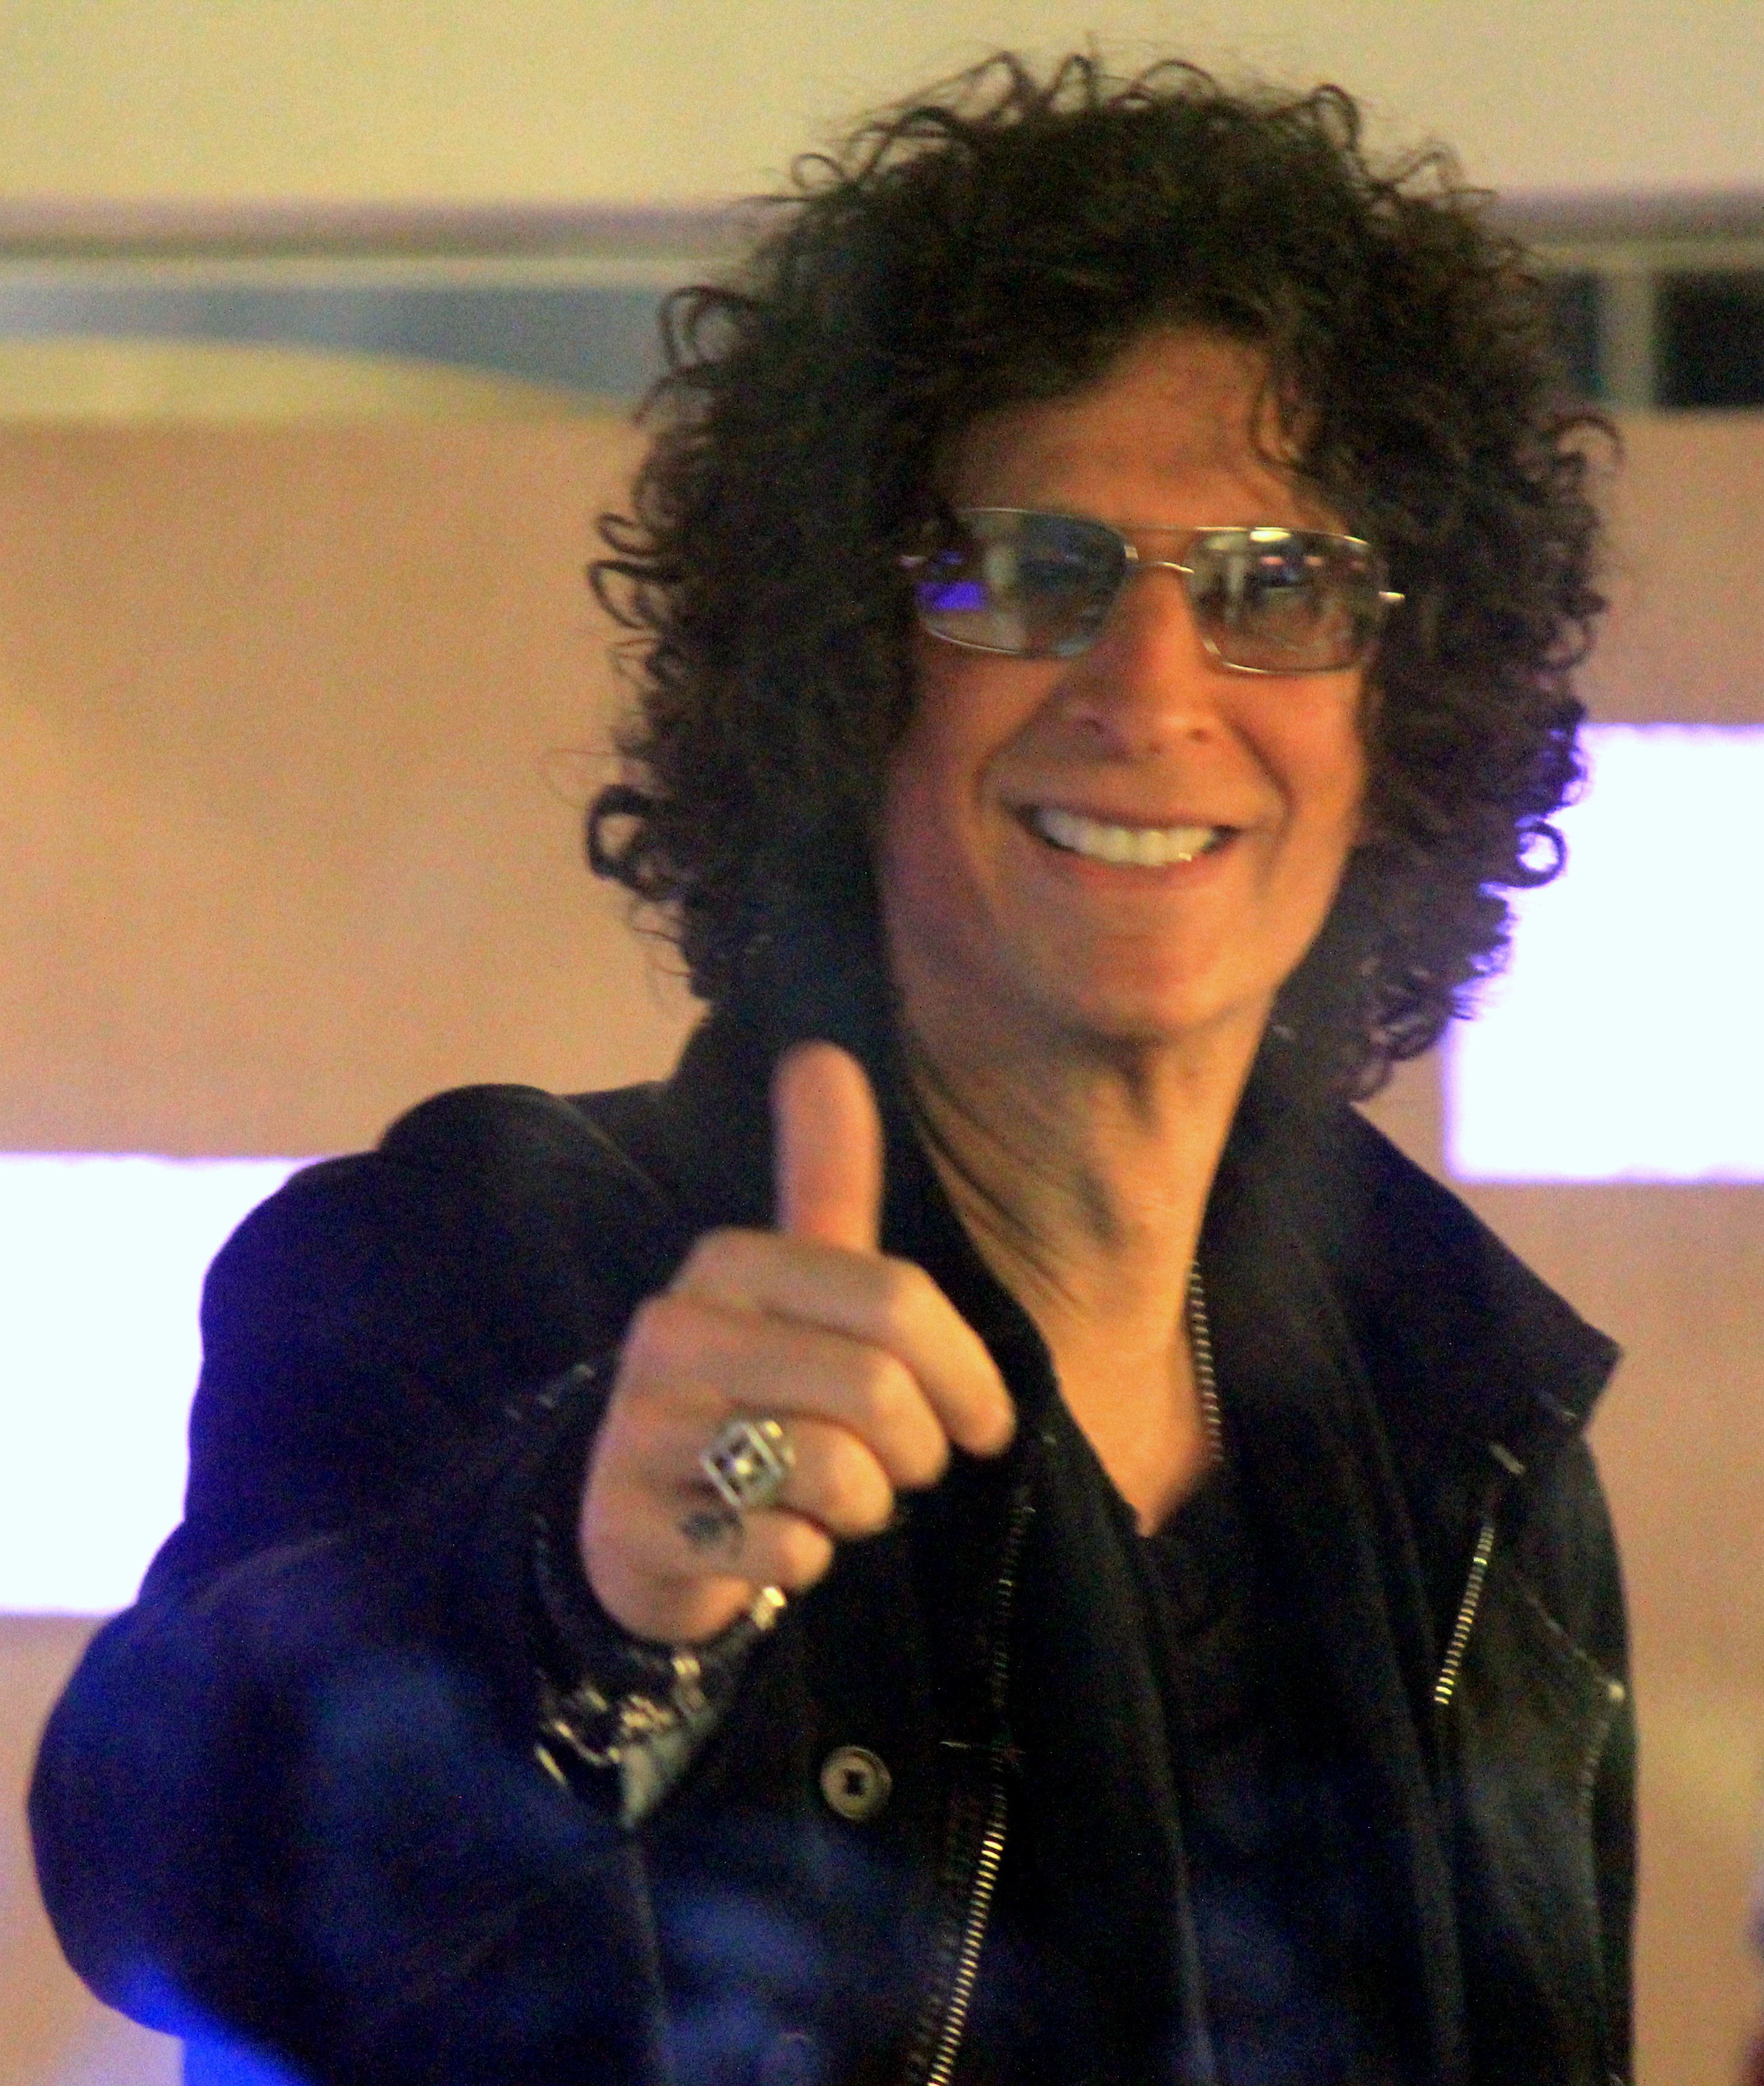 celebrities-and-their-fountain-pens-Howard-Stern